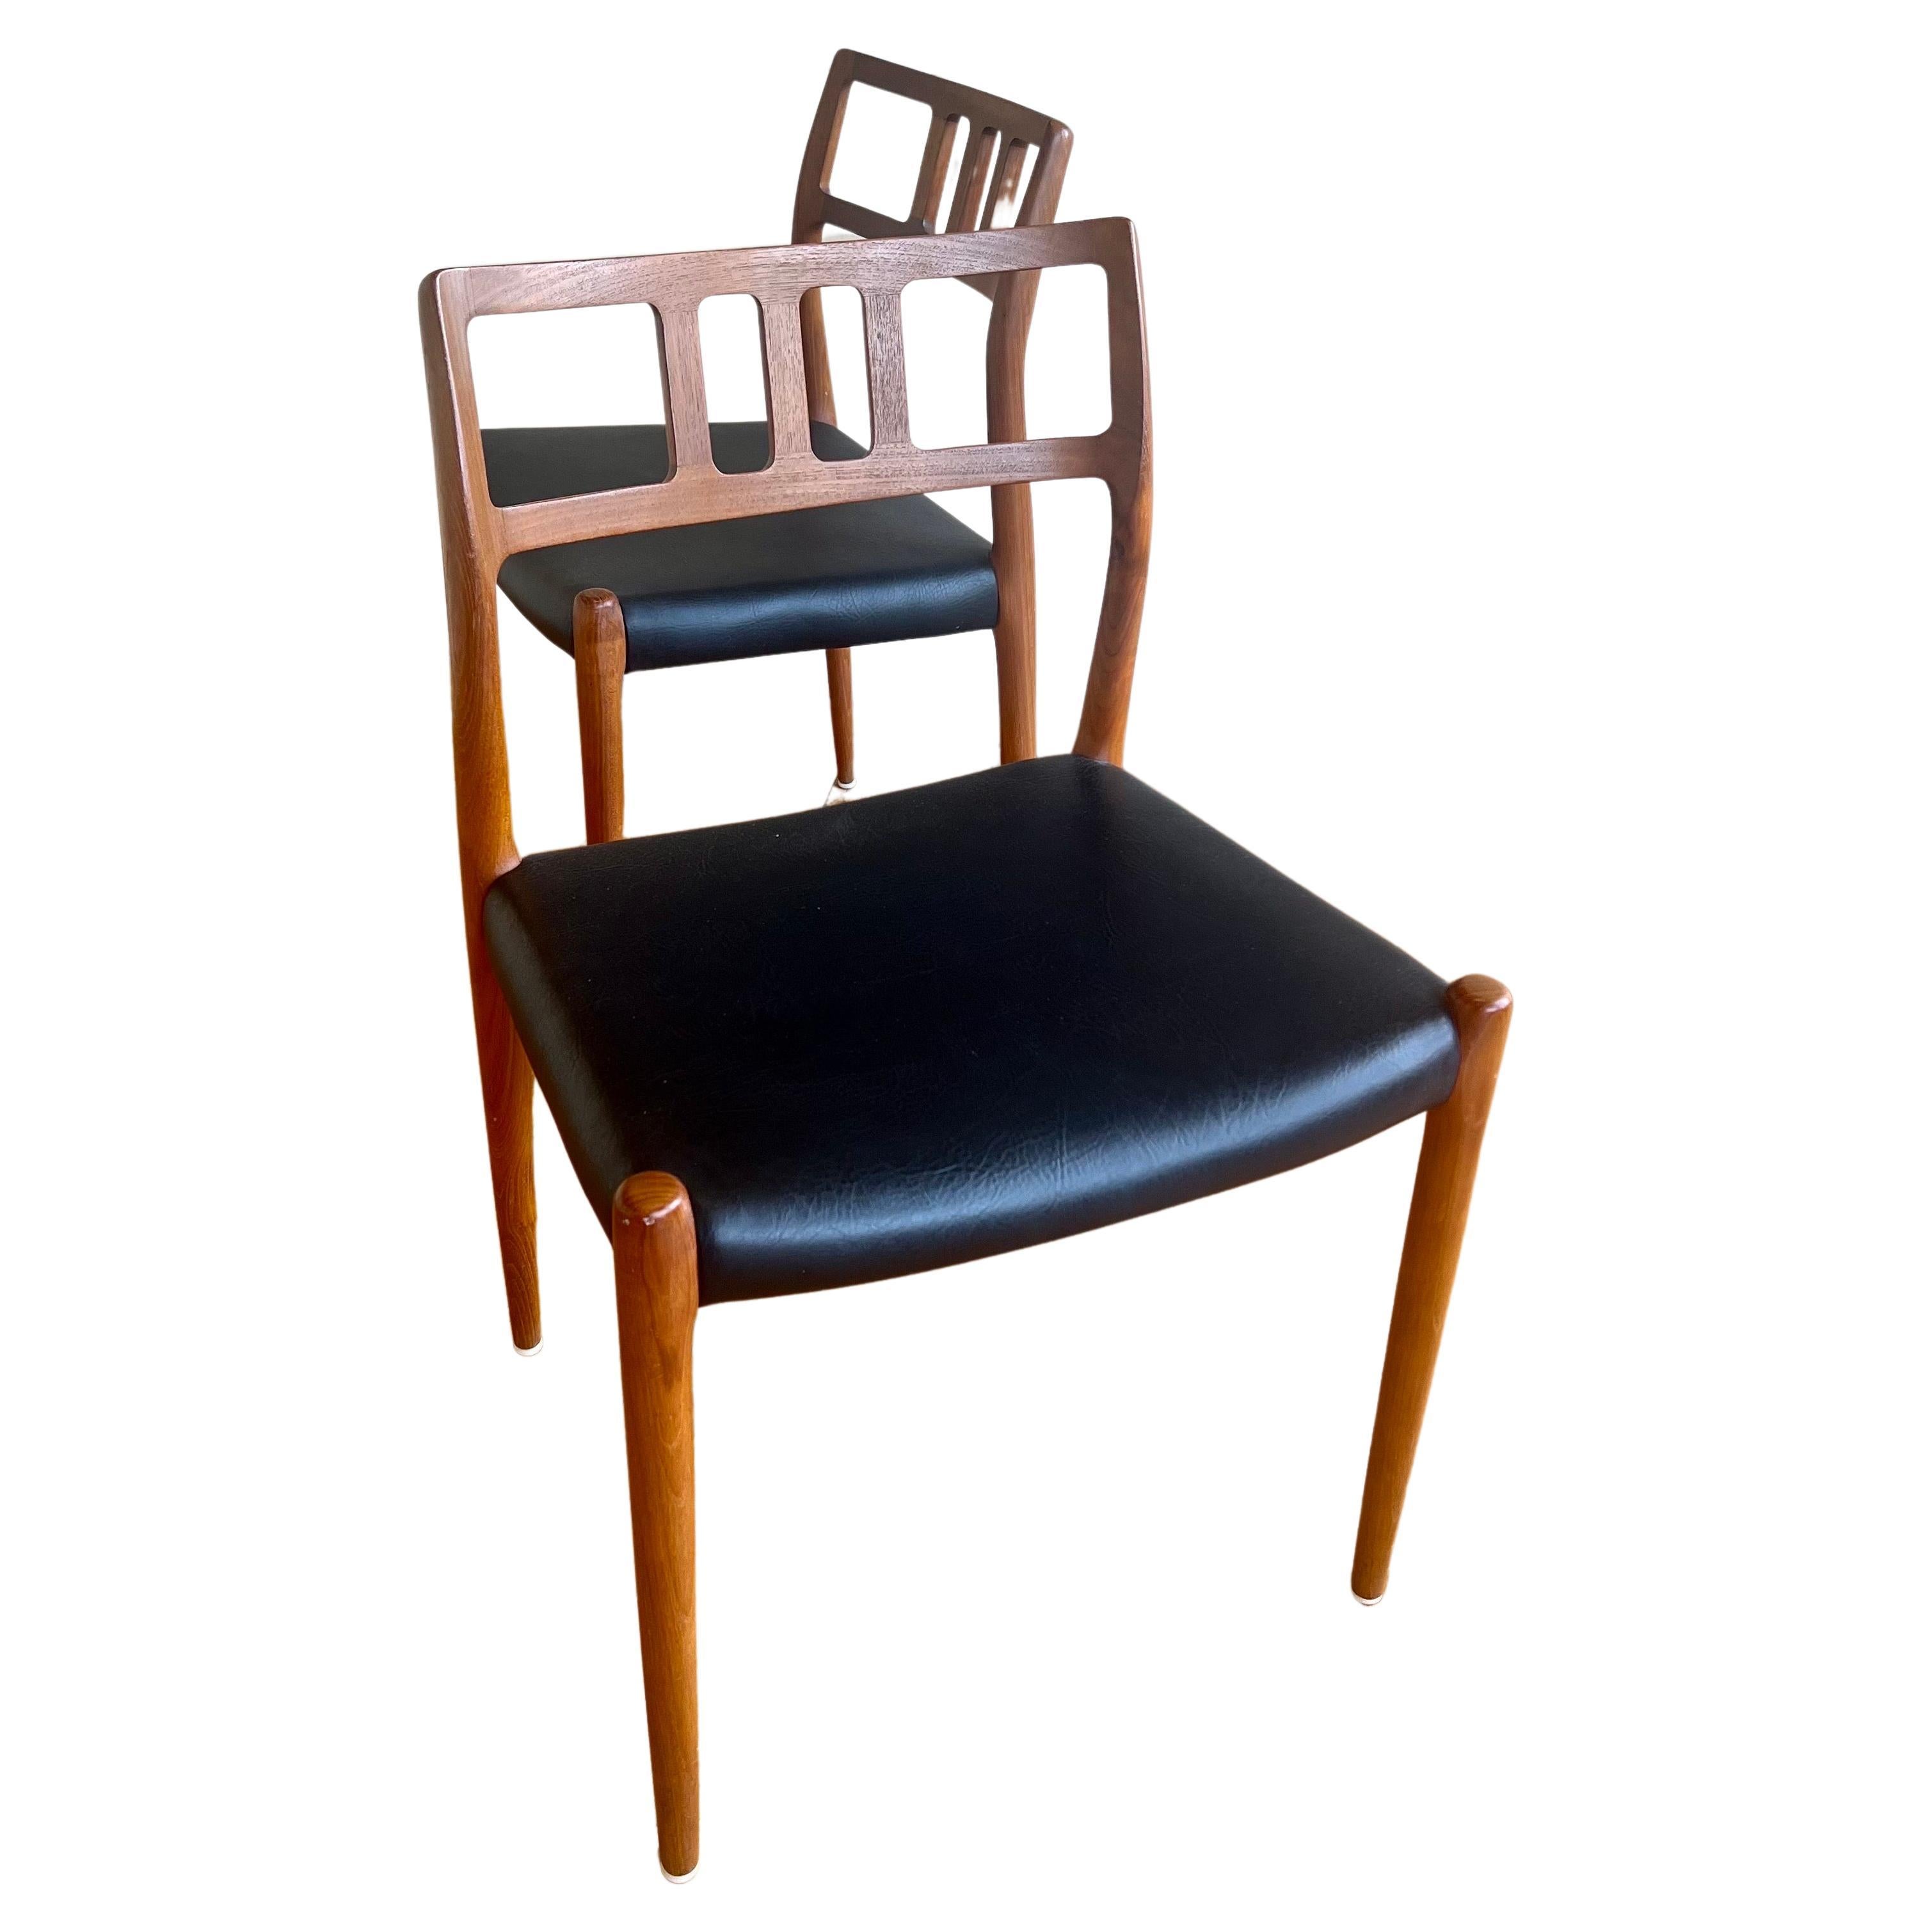 A very nice set of six teak dining chairs designed by Nils Moller, circa 1960s. The chairs are solid teak construction with black Naugahyde upholstered seats. The set is in very good condition. solid and sturdy very light wear.Model 79 Chair by